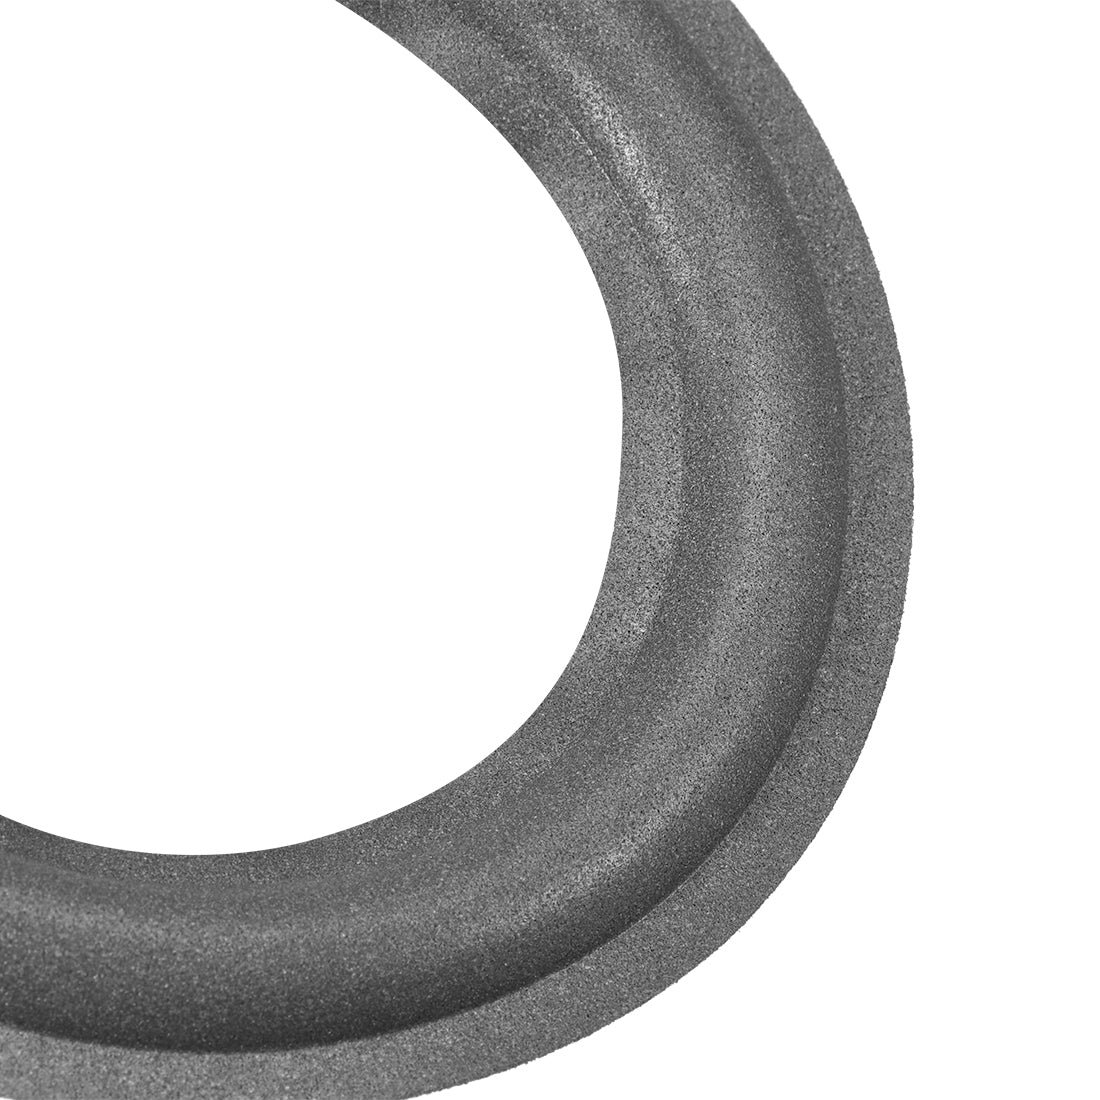 uxcell Uxcell 4.5 inch Speaker Foam Edge Surround Rings Replacement Parts for Speaker